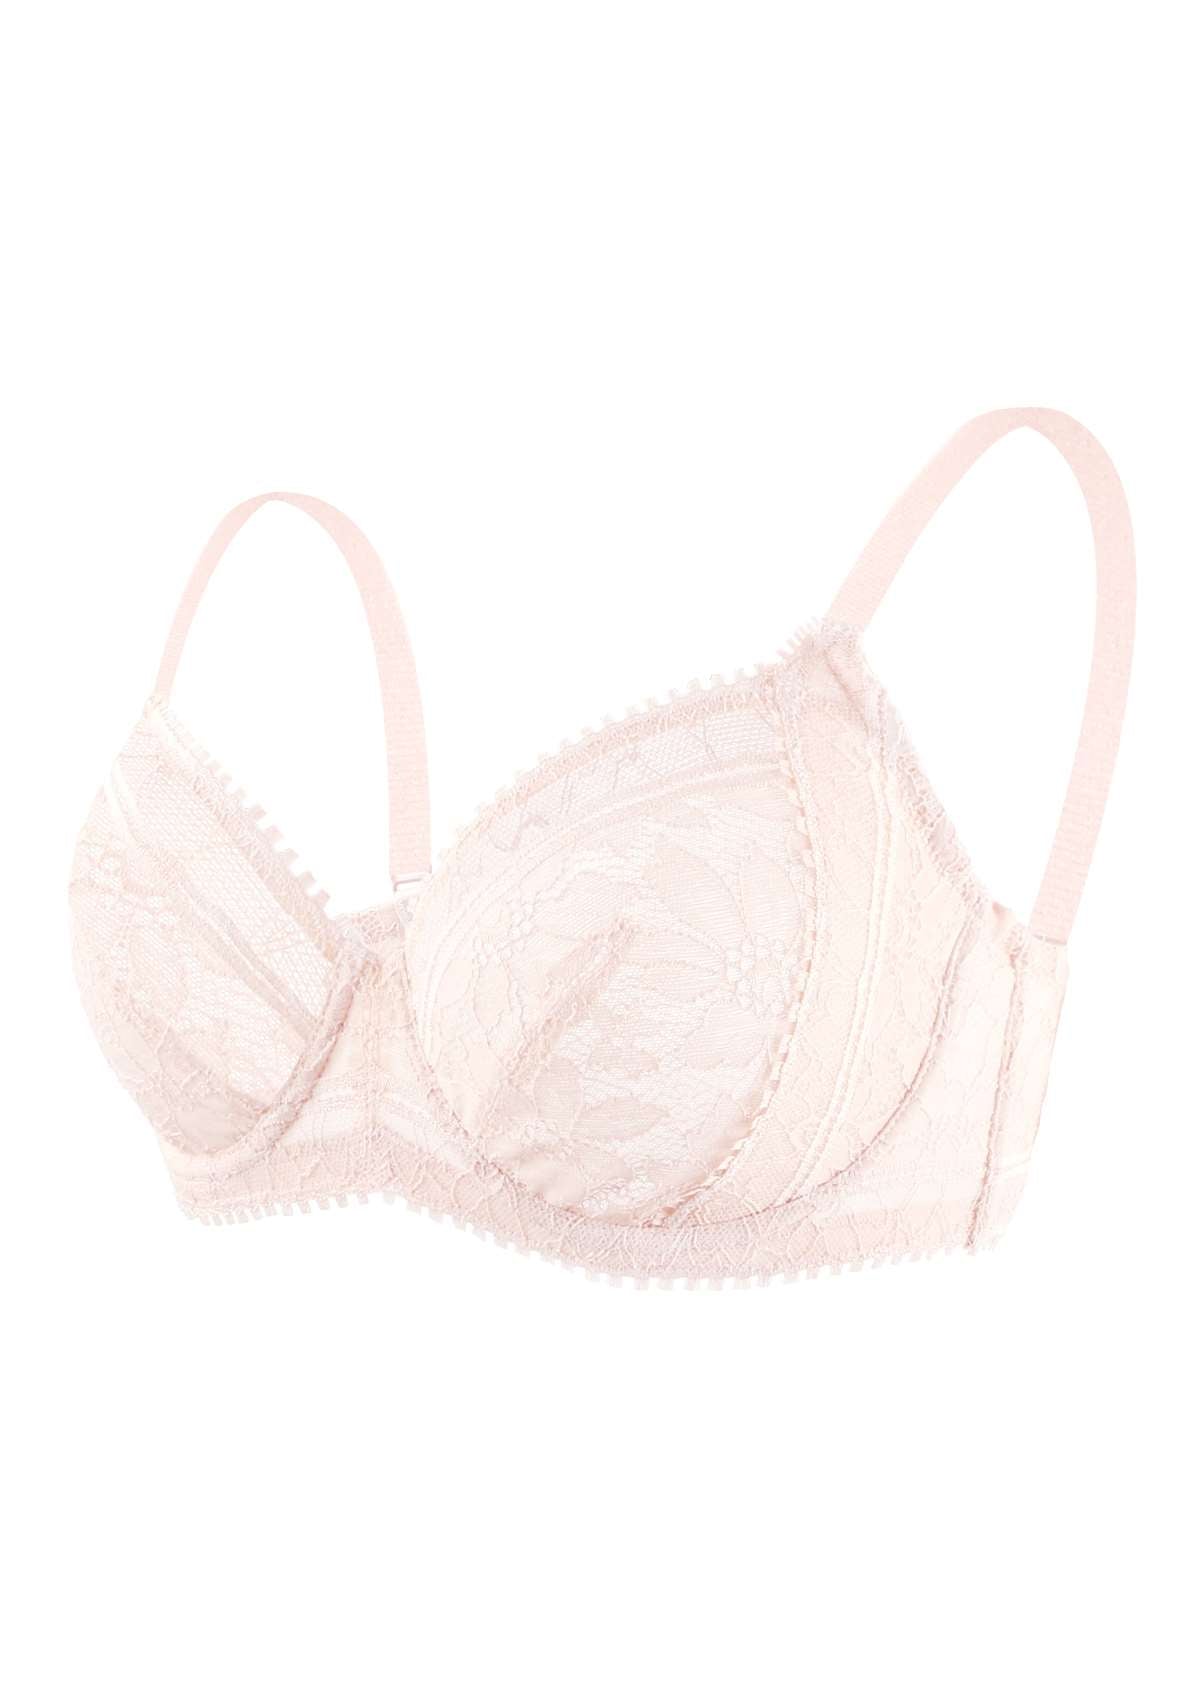 HSIA Silene Floral Delicate Unlined Lace Soft Cup Uplift Bra - Heavenly Pink / 34 / DD/E